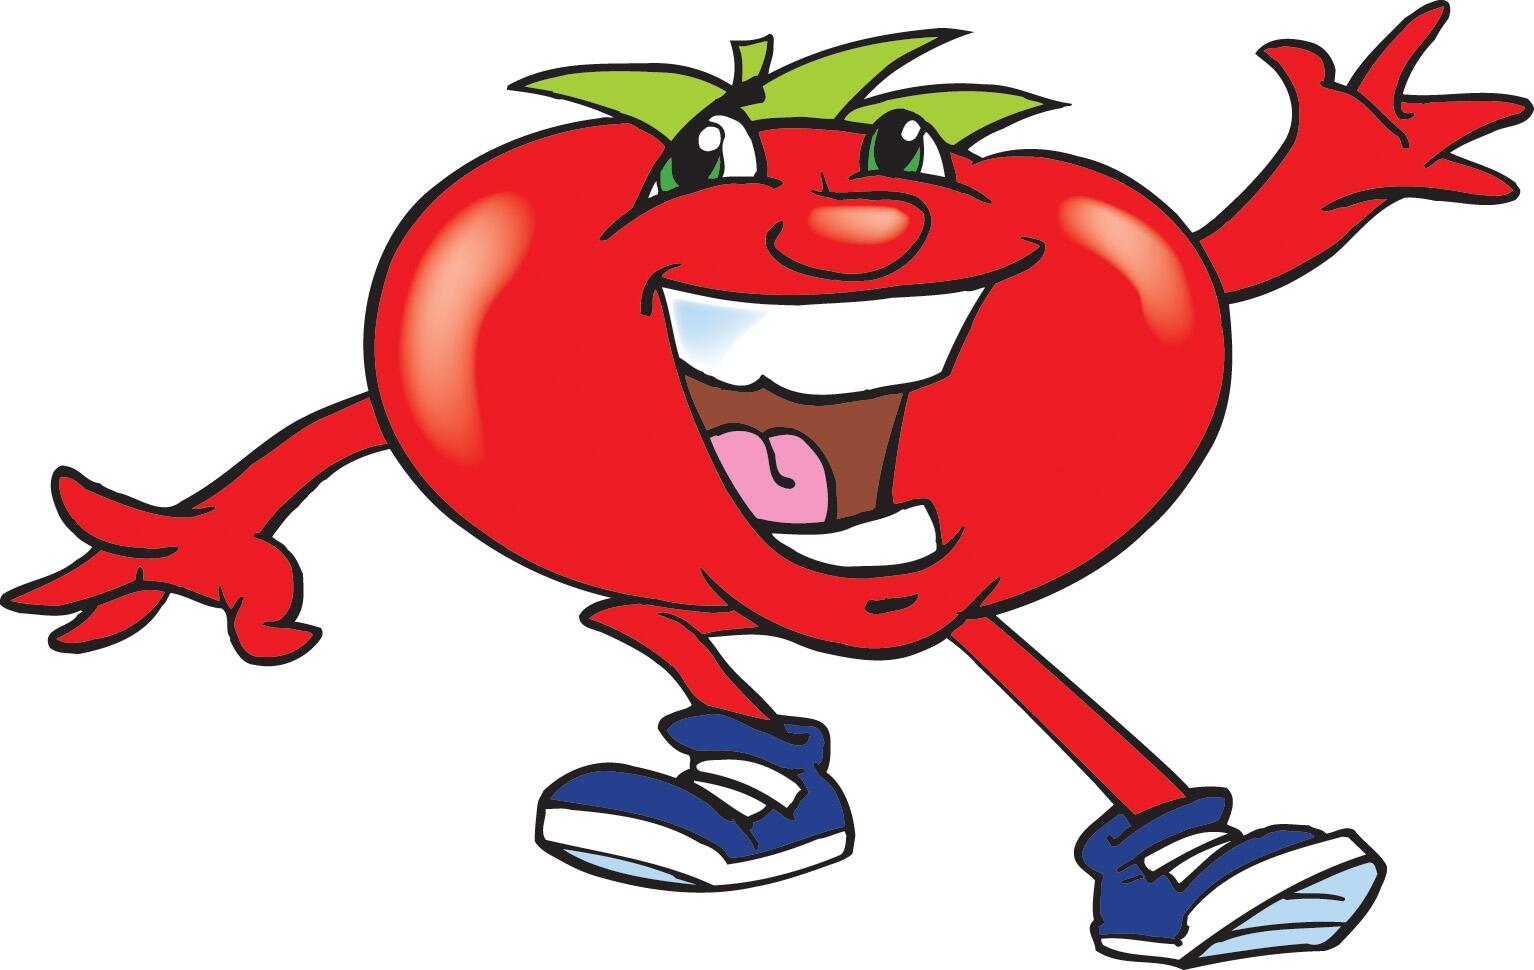 Fazoli's on Twitter: "Tony the Tomato is our pick for #MCM! RT & Follow